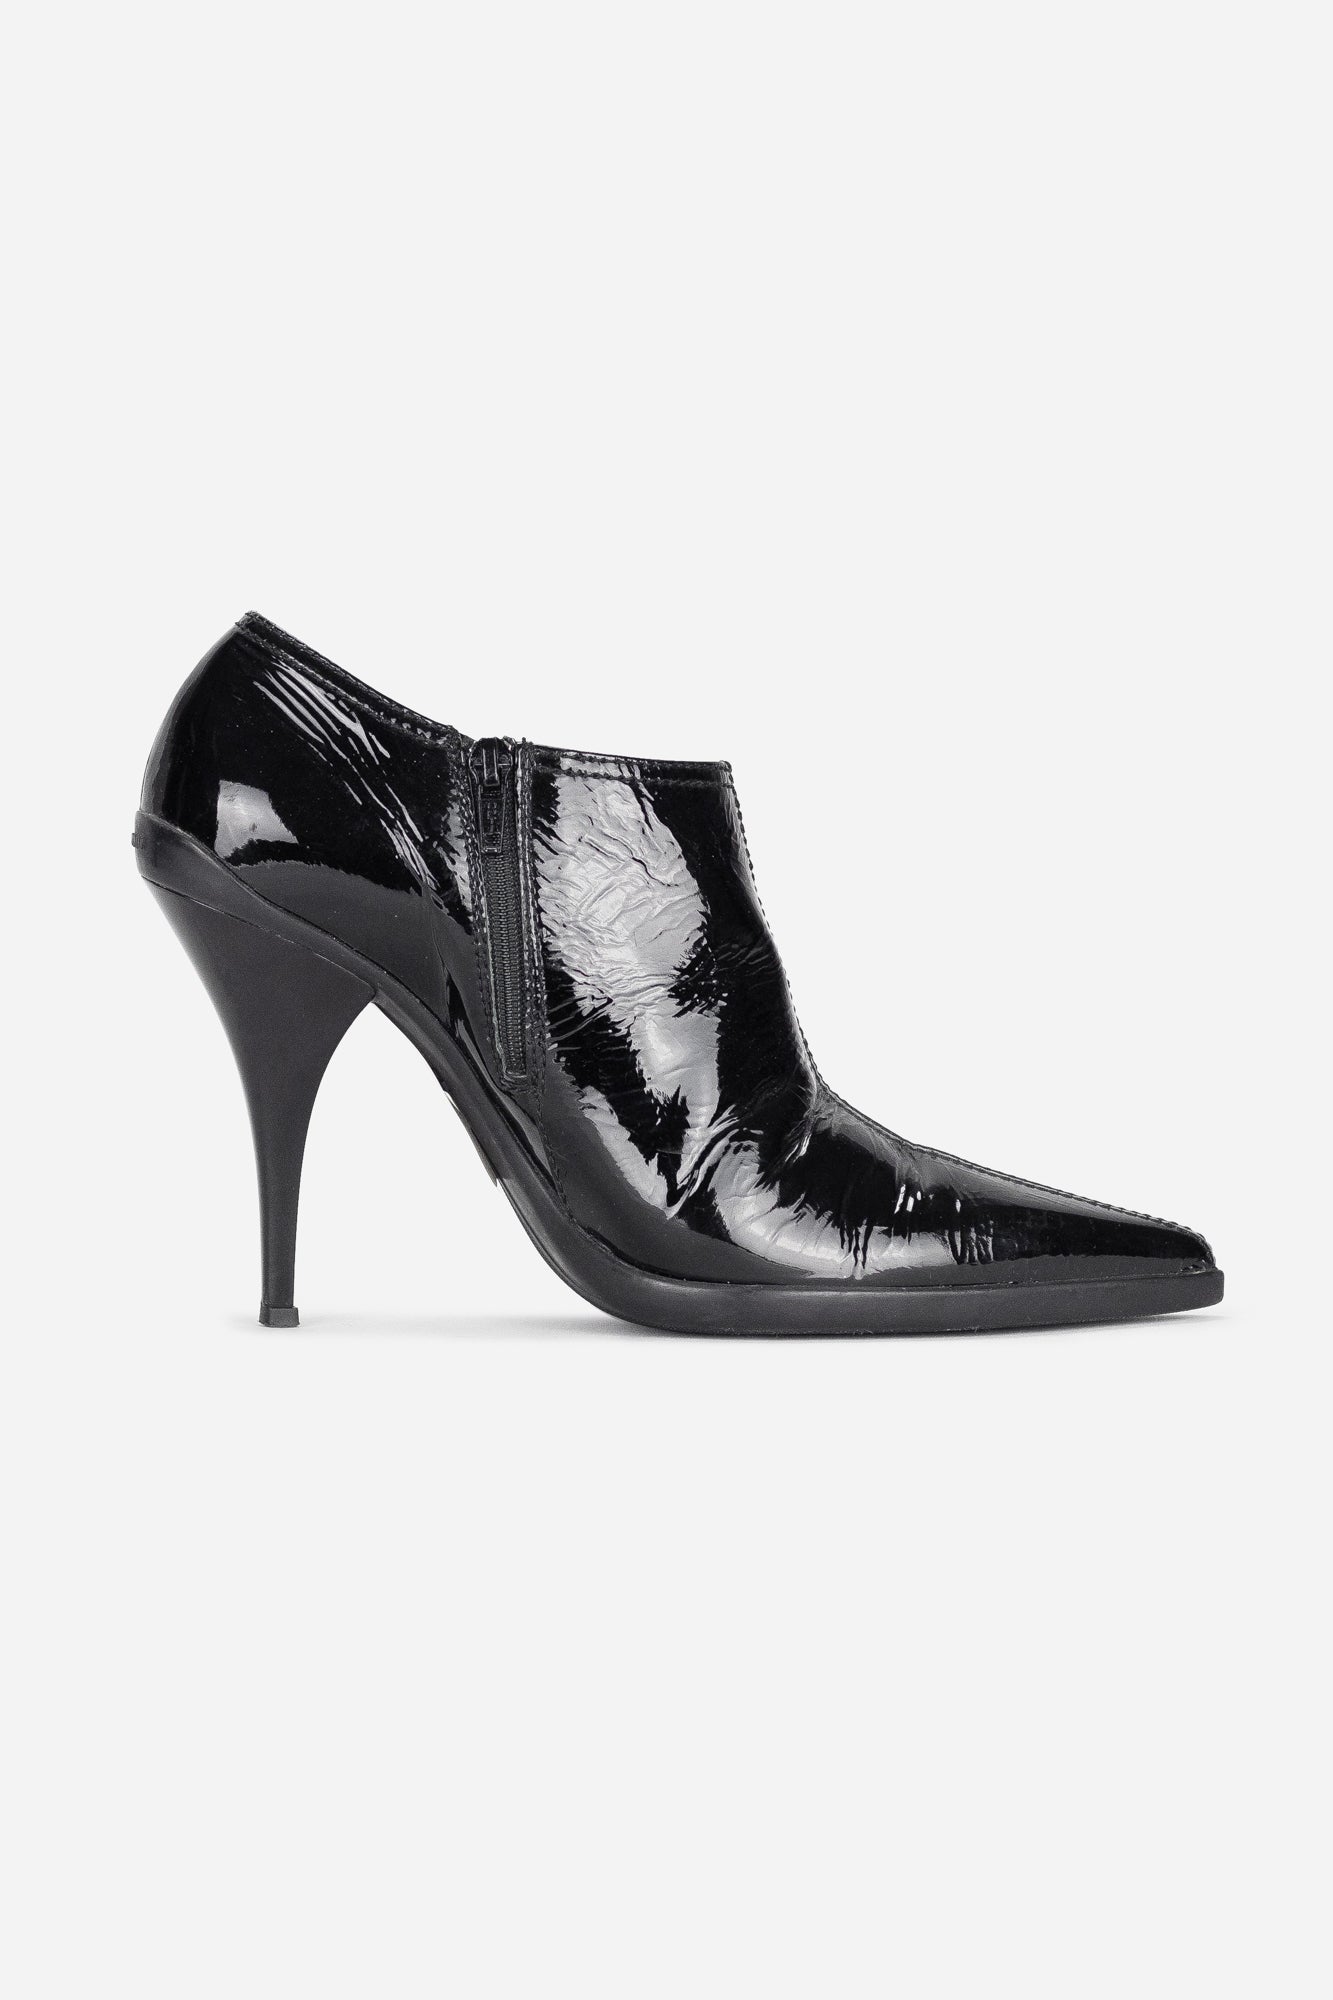 Black Patent Leather Pointed Toe Booties